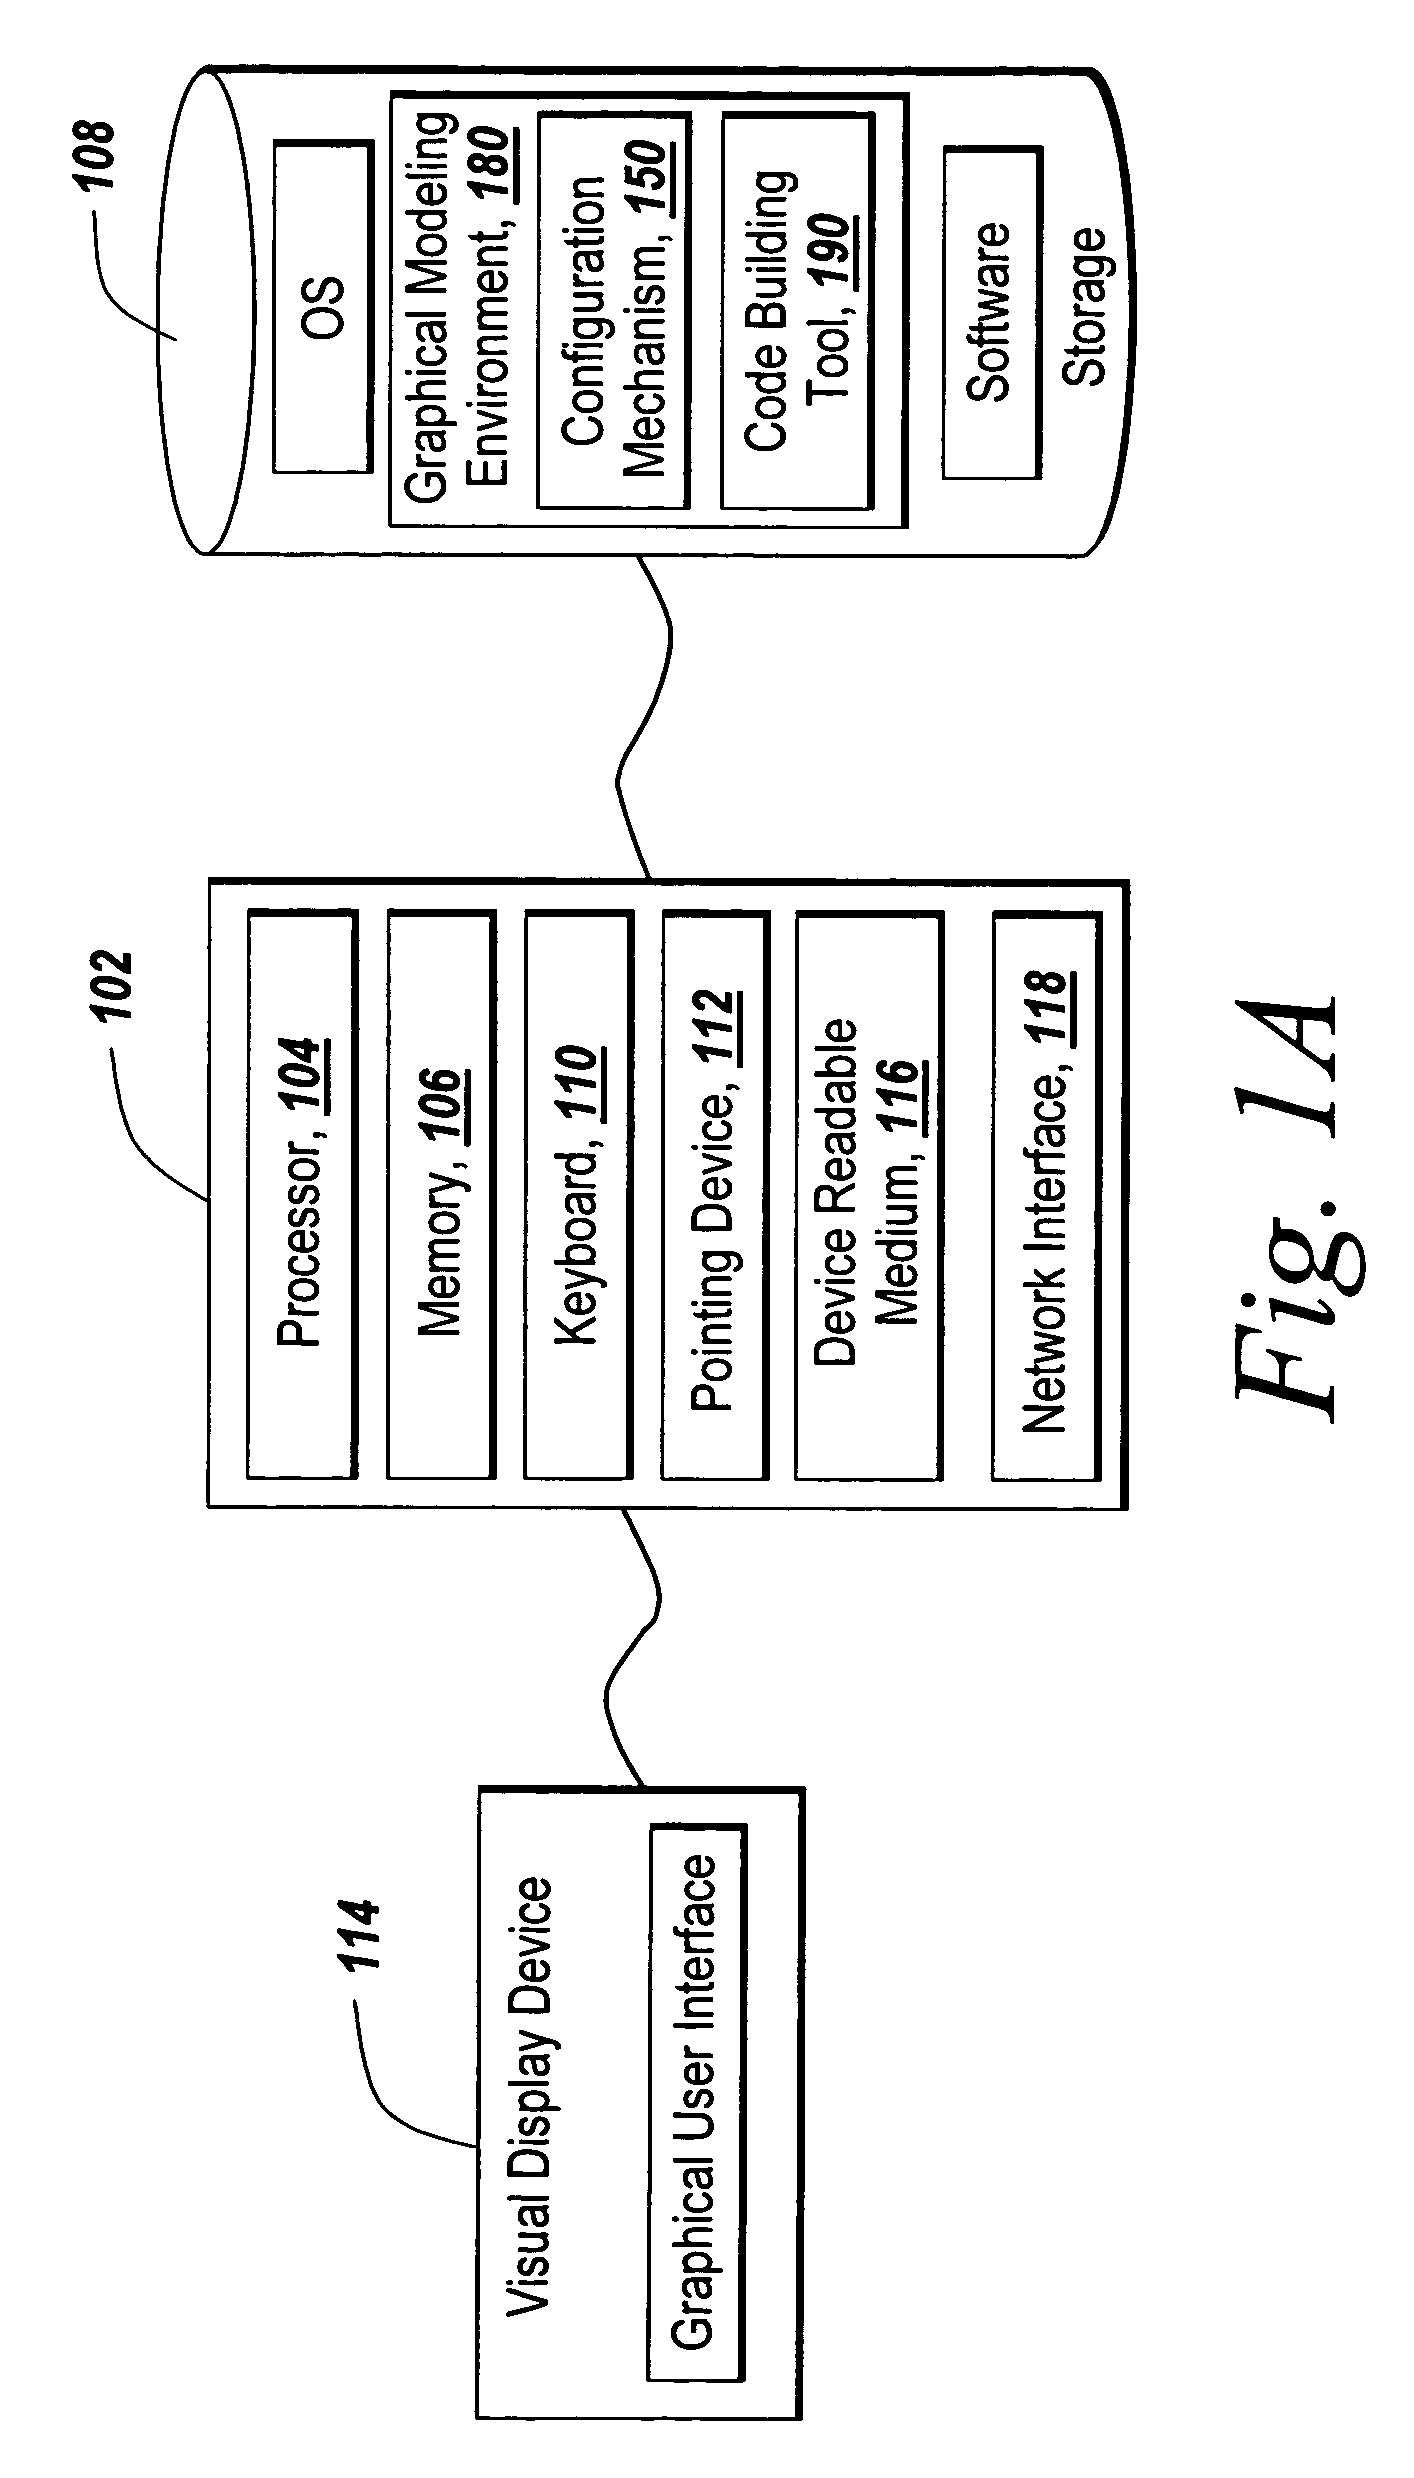 Automatic generation of component interfaces for computational hardware implementations generated from a block diagram model